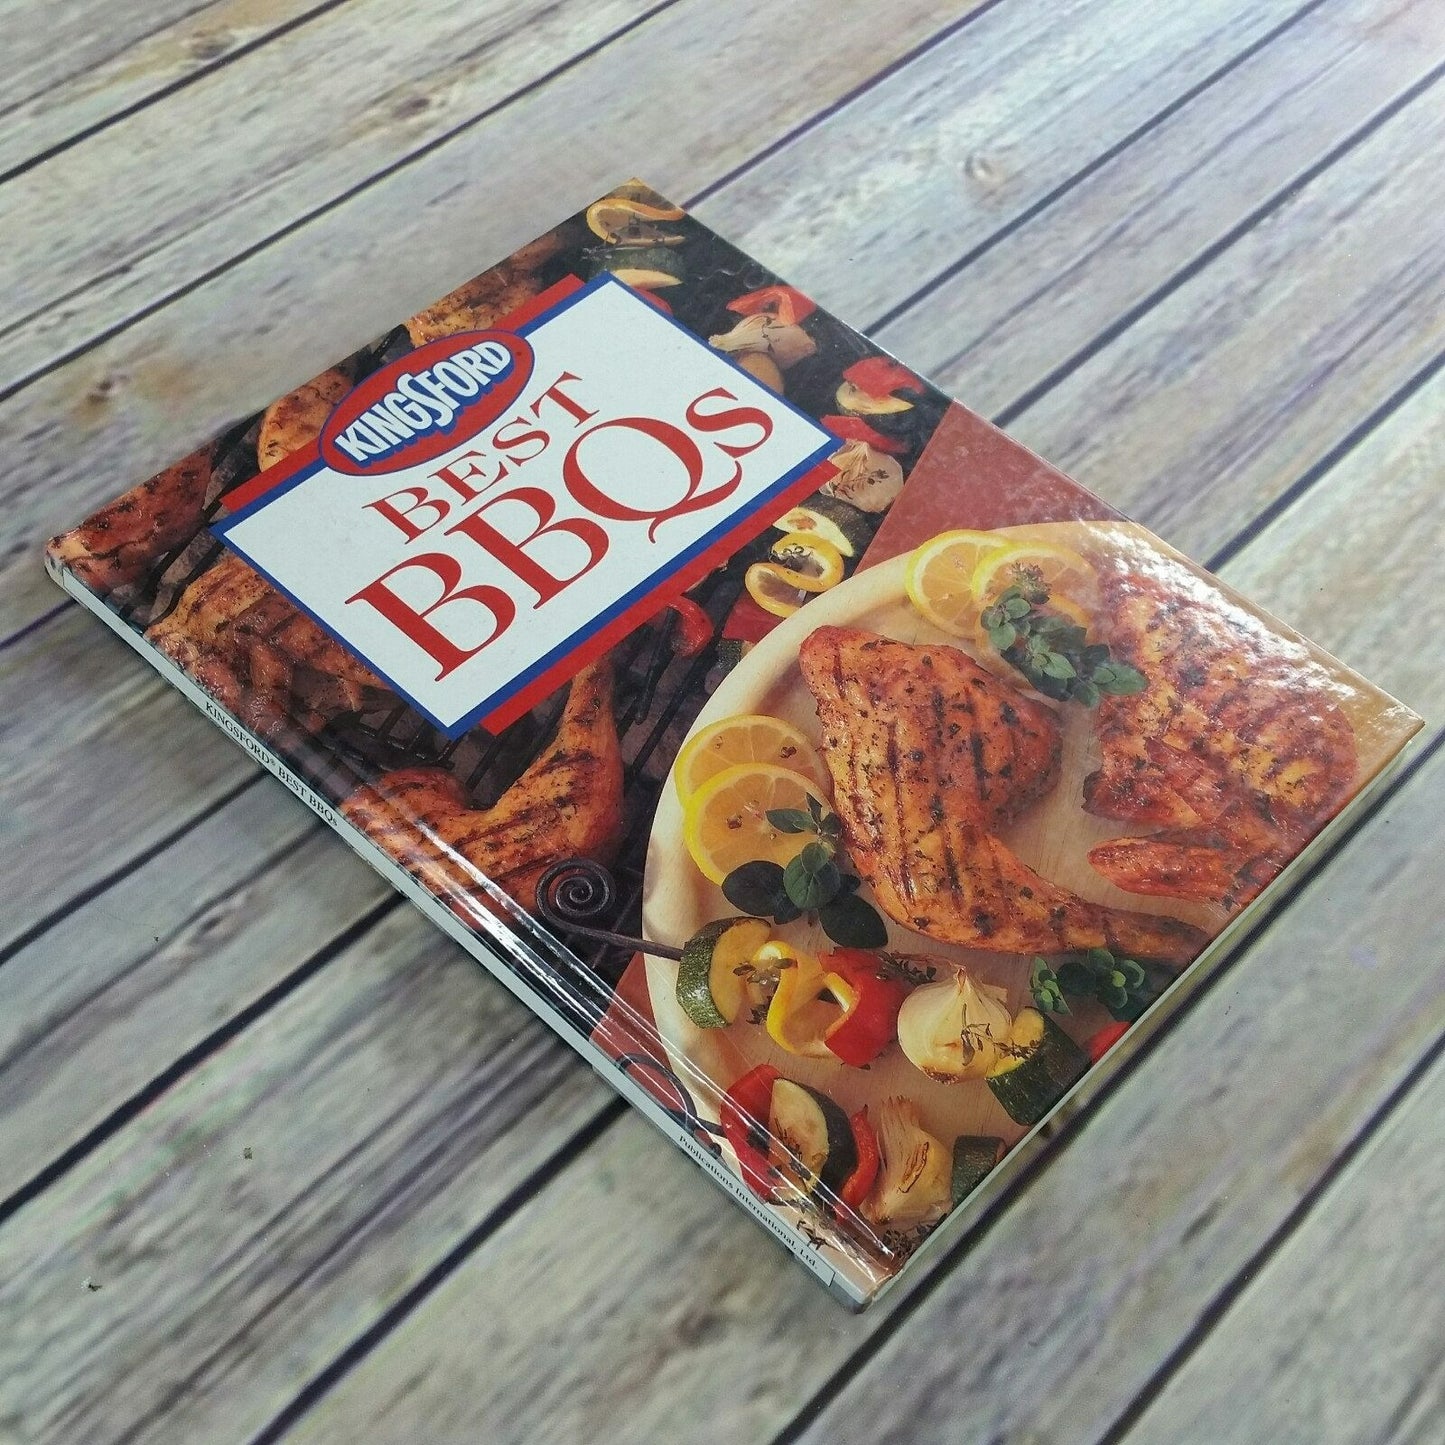 Vintage BBQ Cookbook Kingsford Barbecue Favorite Recipes 1995 Charcoal BBQ Recipes BBQing Food Basics Meats Poultry Seafood Smoked Sides